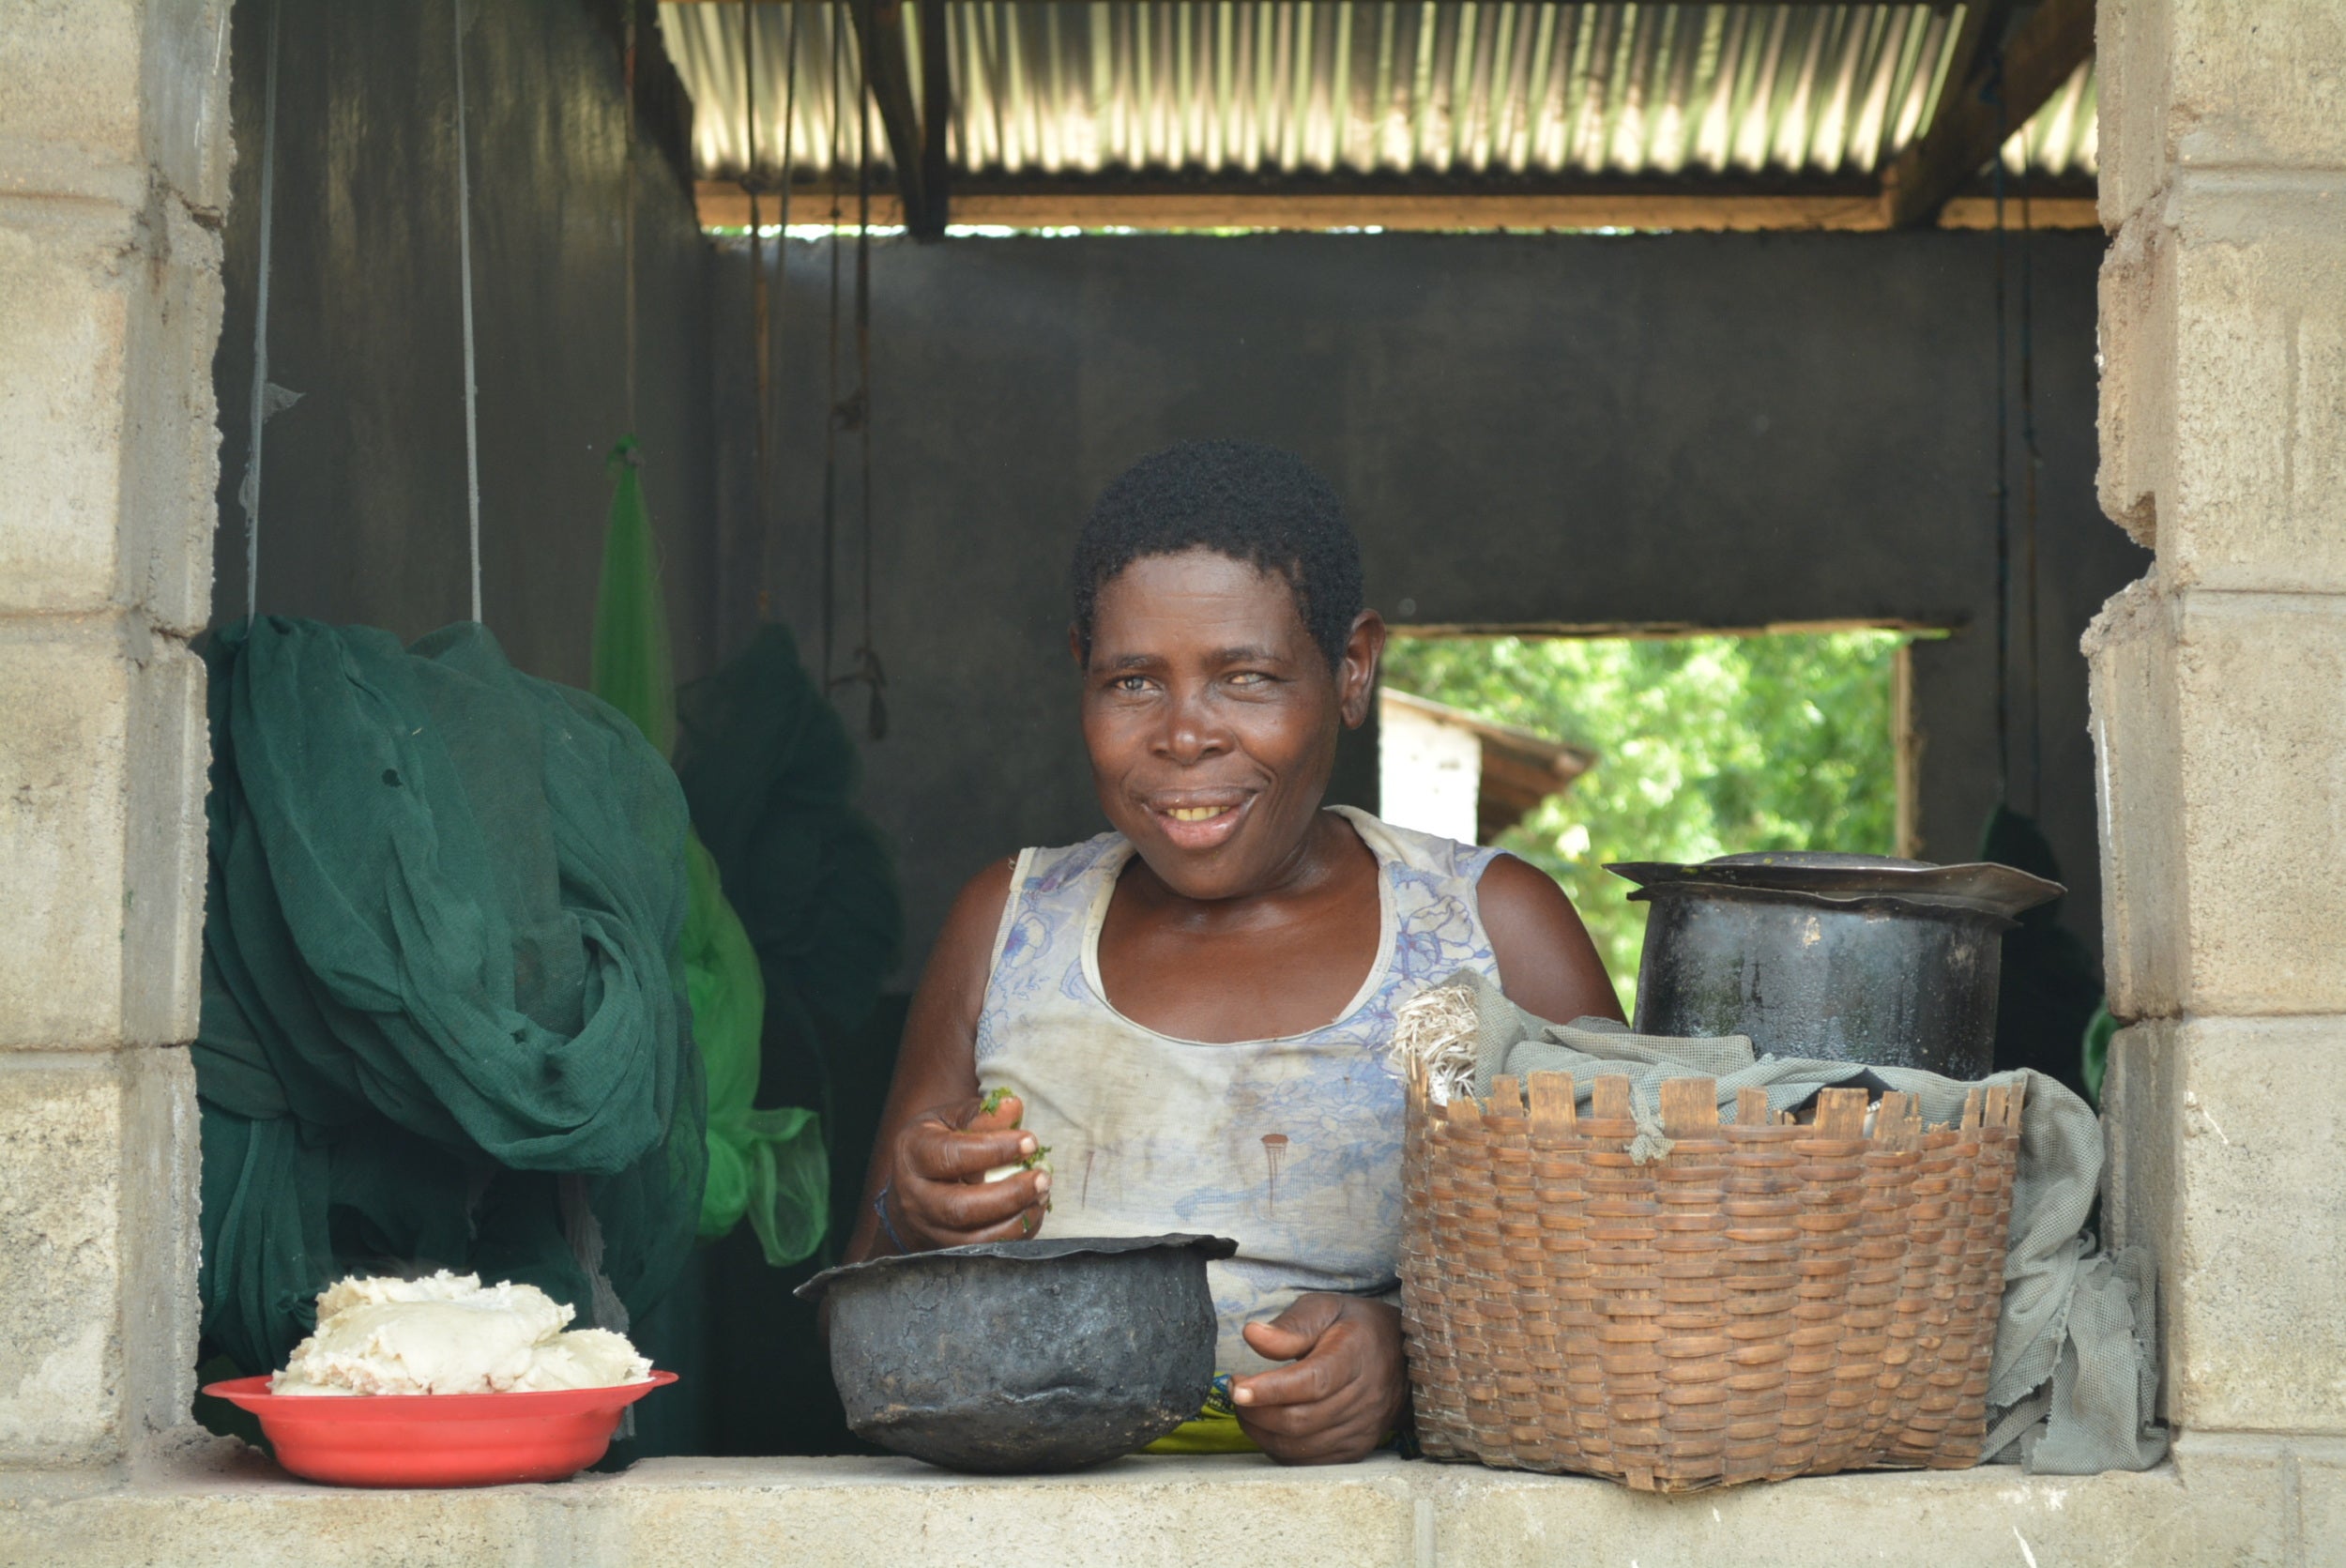 Jina Fungo from Chilanga village in Nsanje, Malawi moved in a CARE-supported evacuation center before floods hit her area. “We can cook in the evacuation center even when it’s raining,” she says. “But when you are in a tent, it’s not possible as it can catch fire.